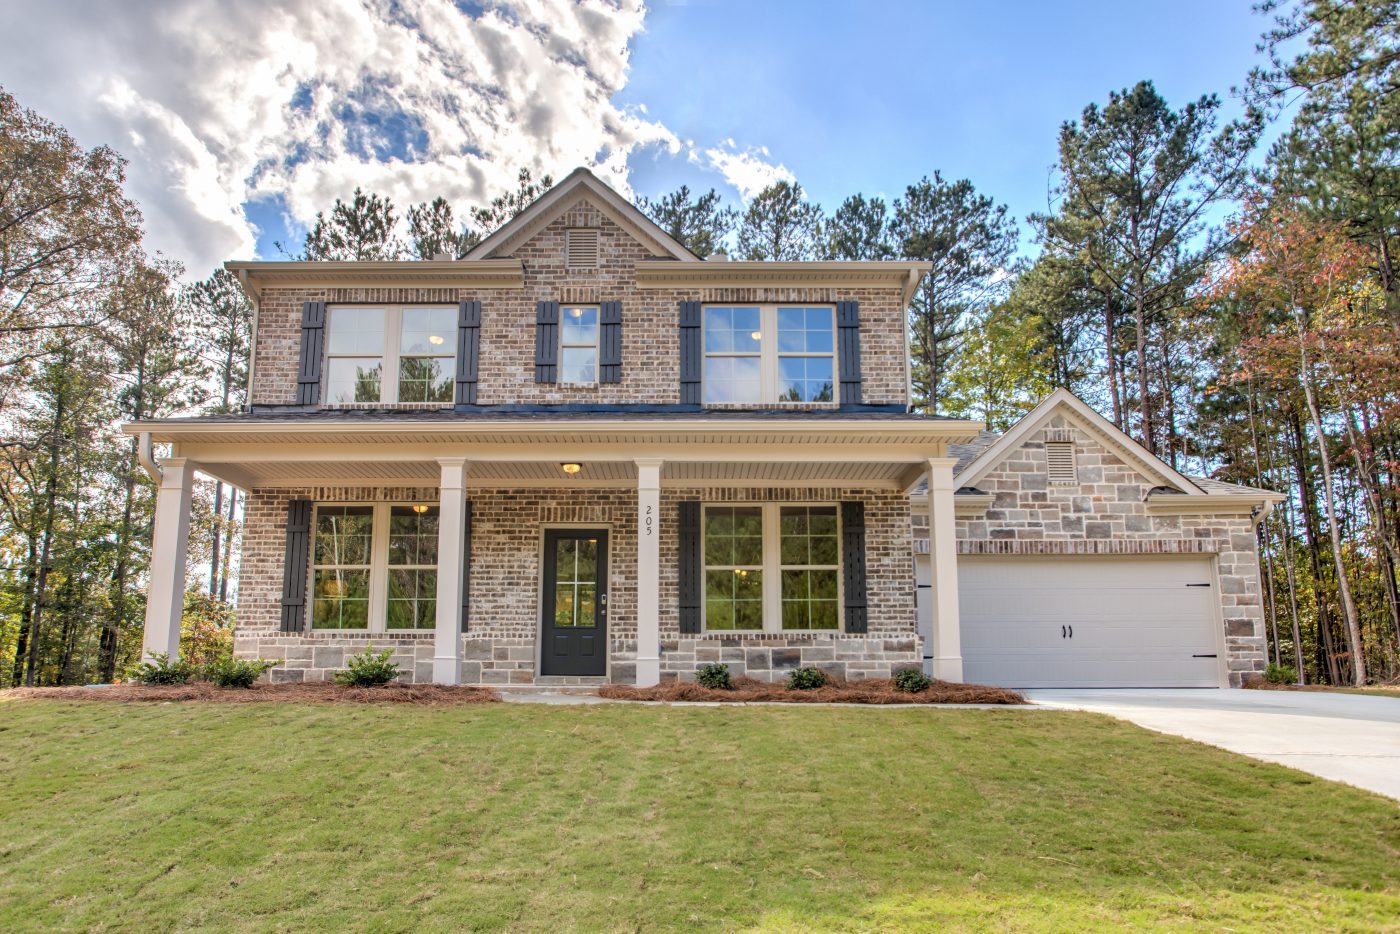 vineyard park homes in central Georgia from the $200s